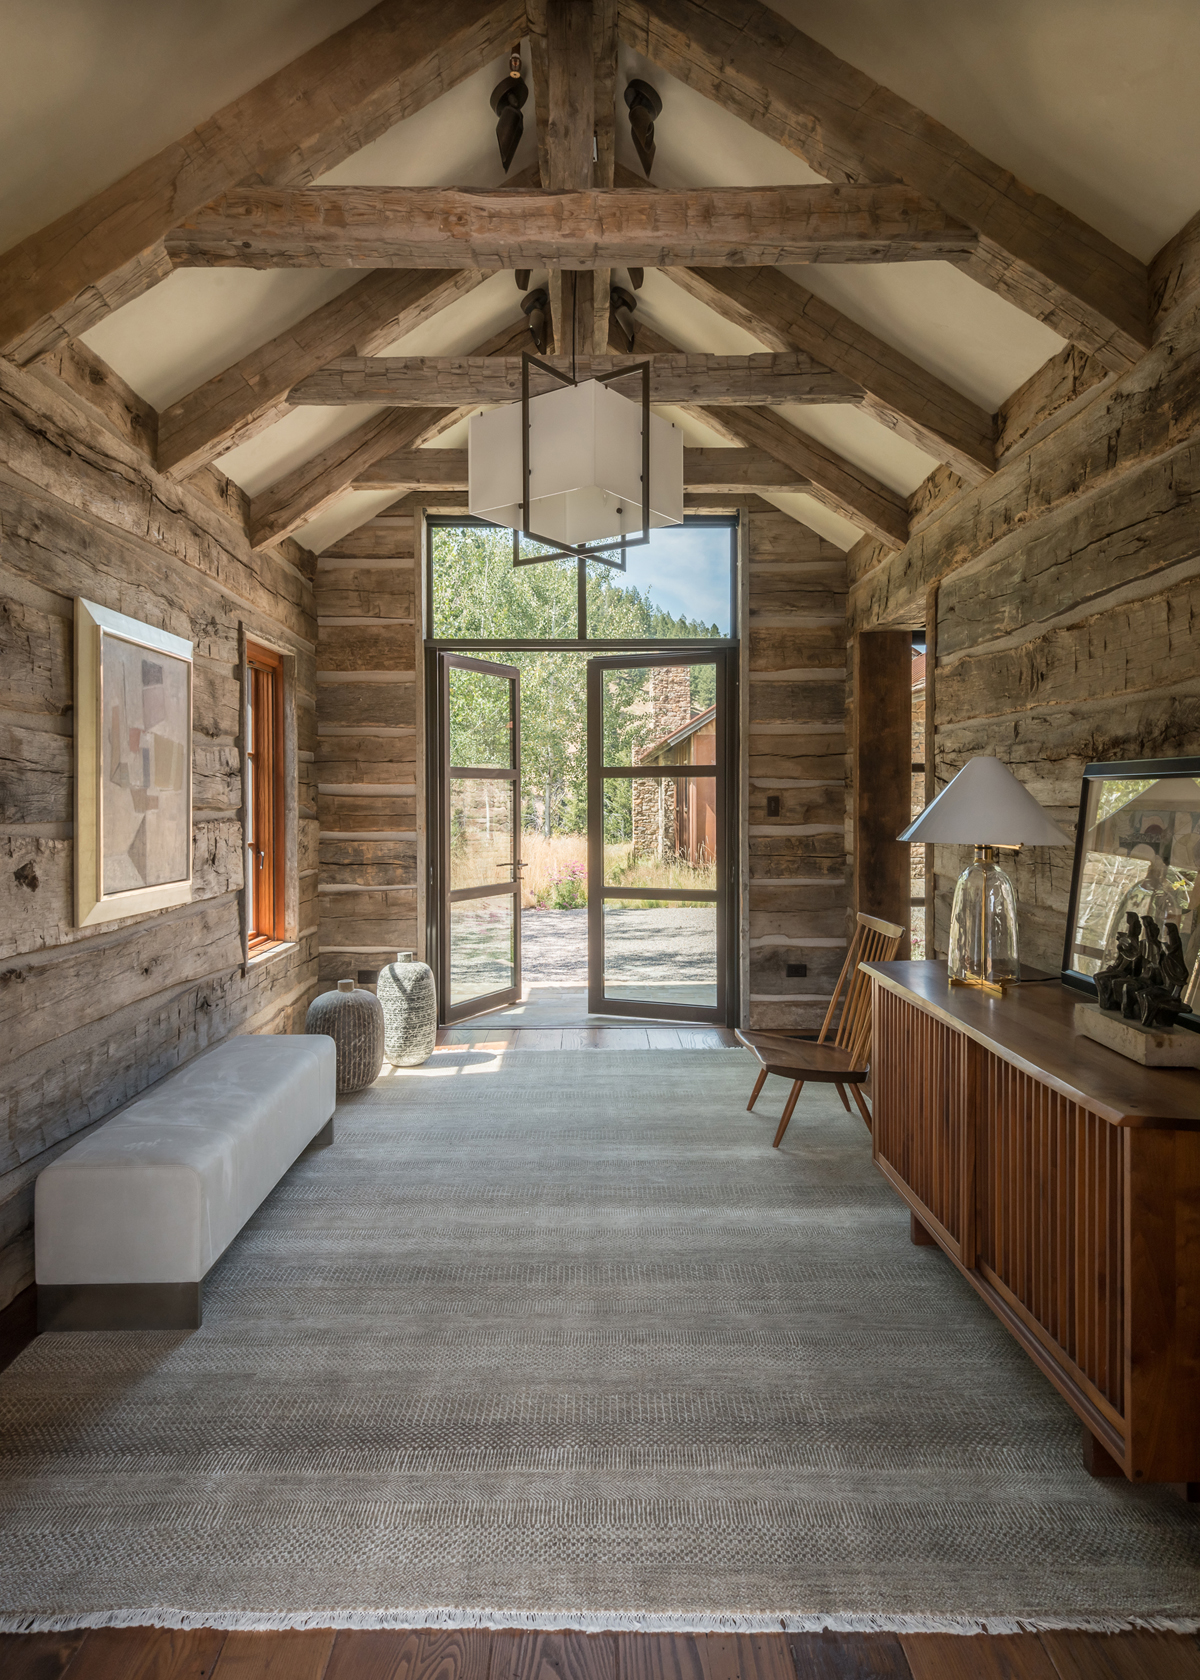 The simplicity of the entryway décor, by WRJ Design, emphasizes the clean lines of the architecture and serves as counterpoint to rustic timber (photo by Audrey Hall).